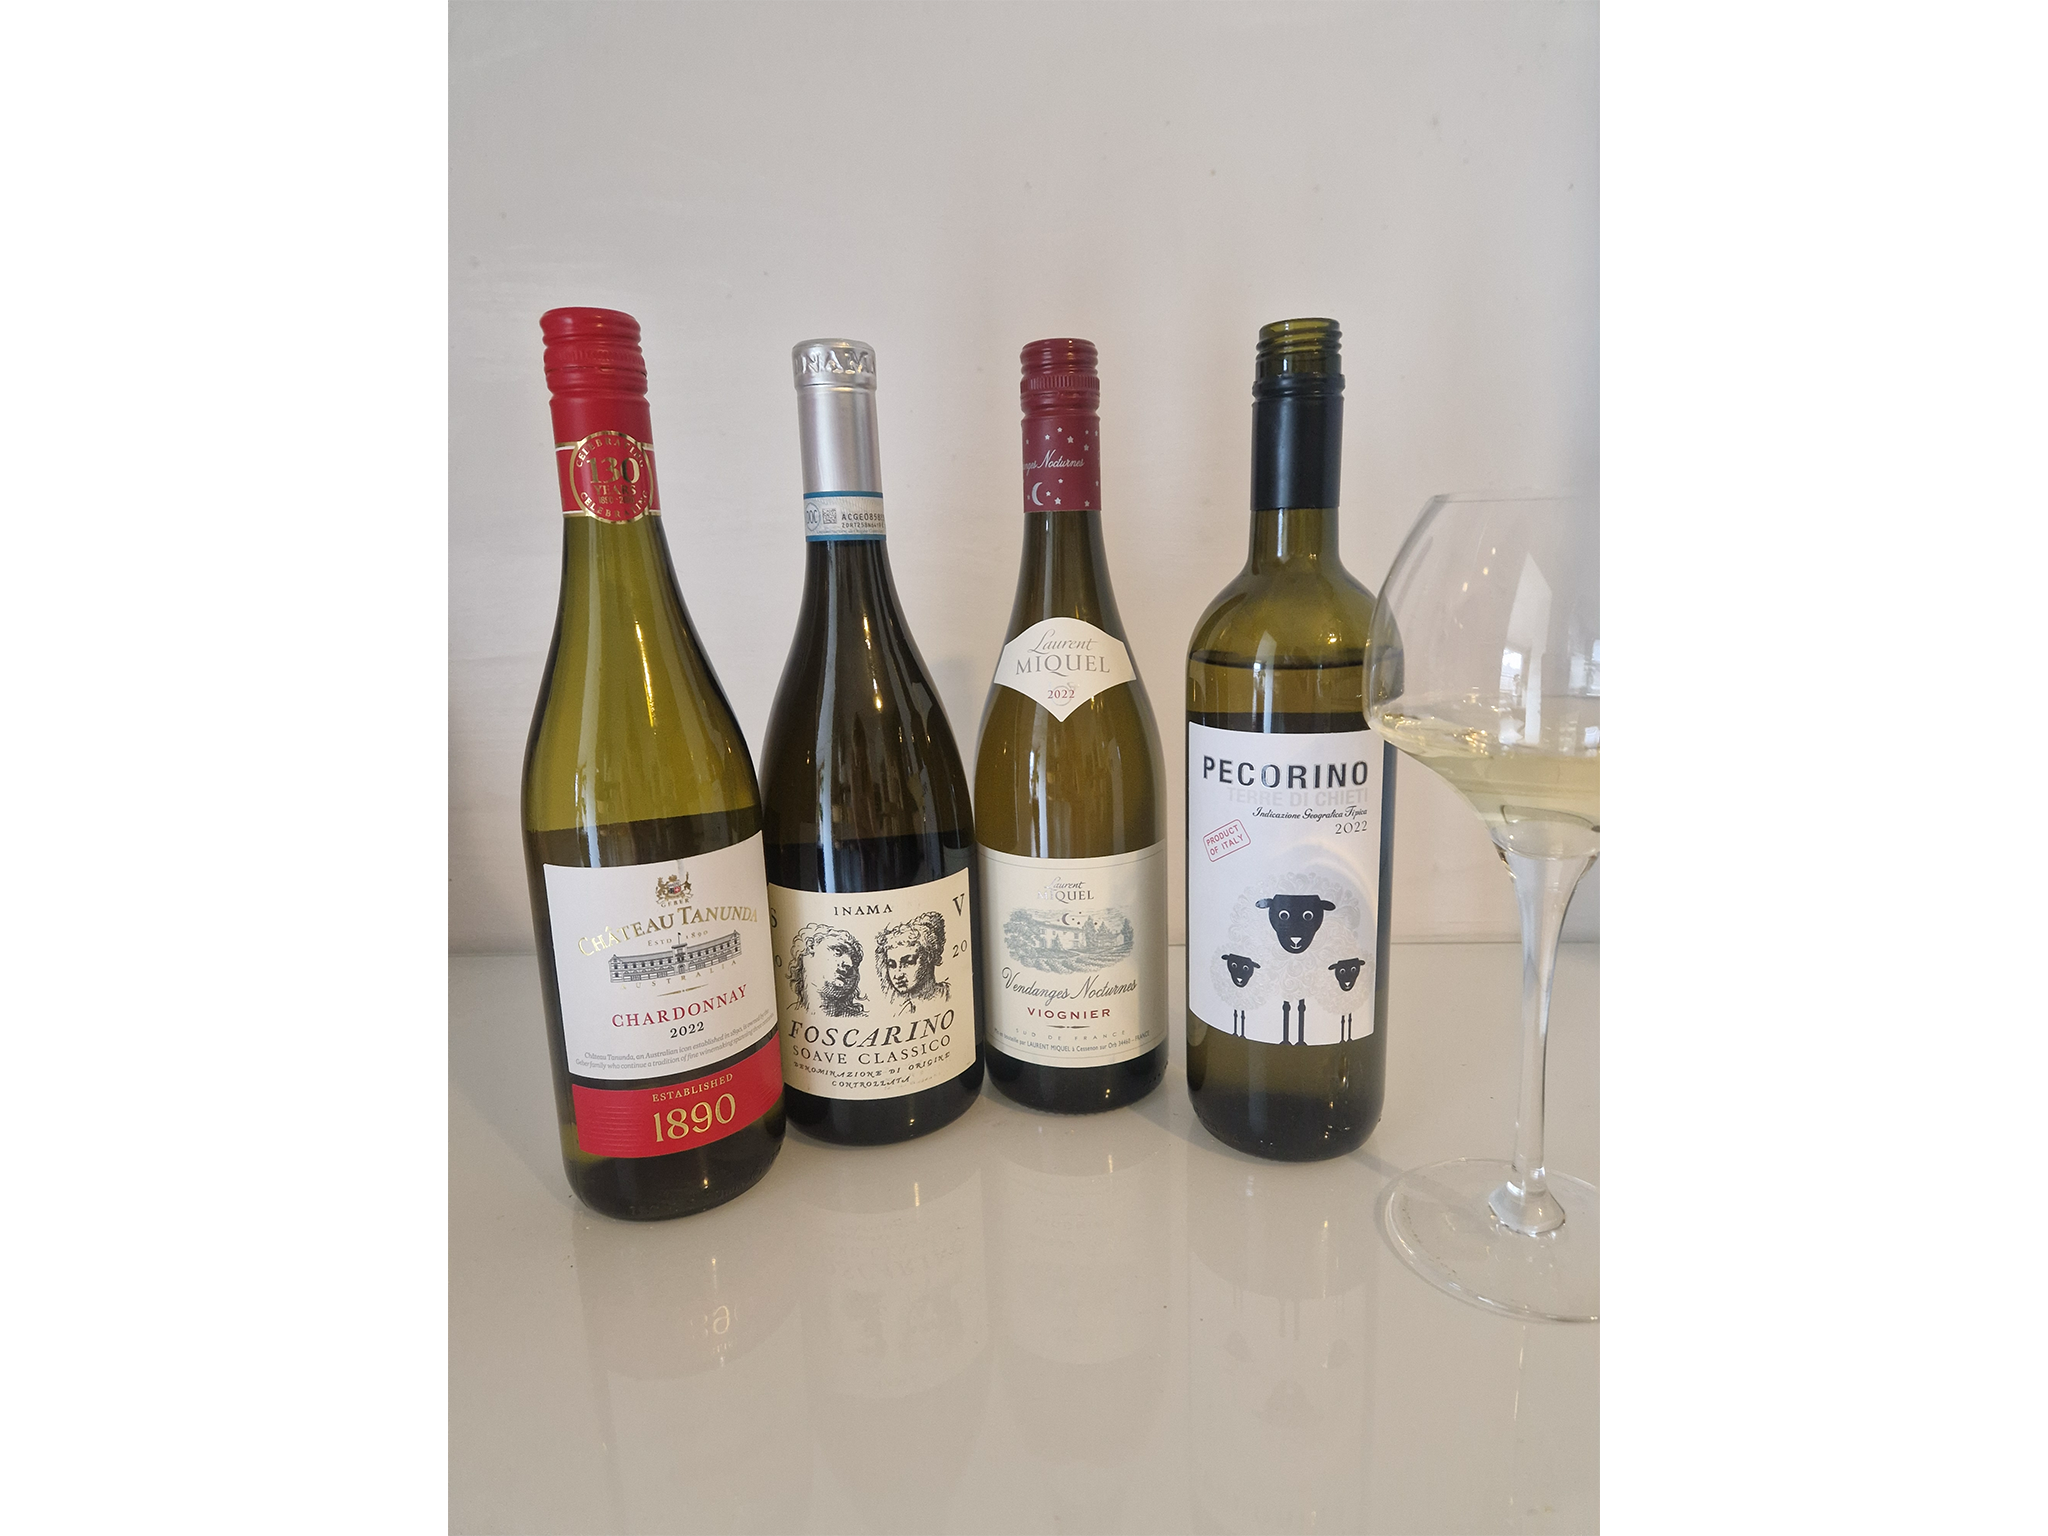 A selection of the best Christmas white wines that we taste tested for our review – a hard job eh?!